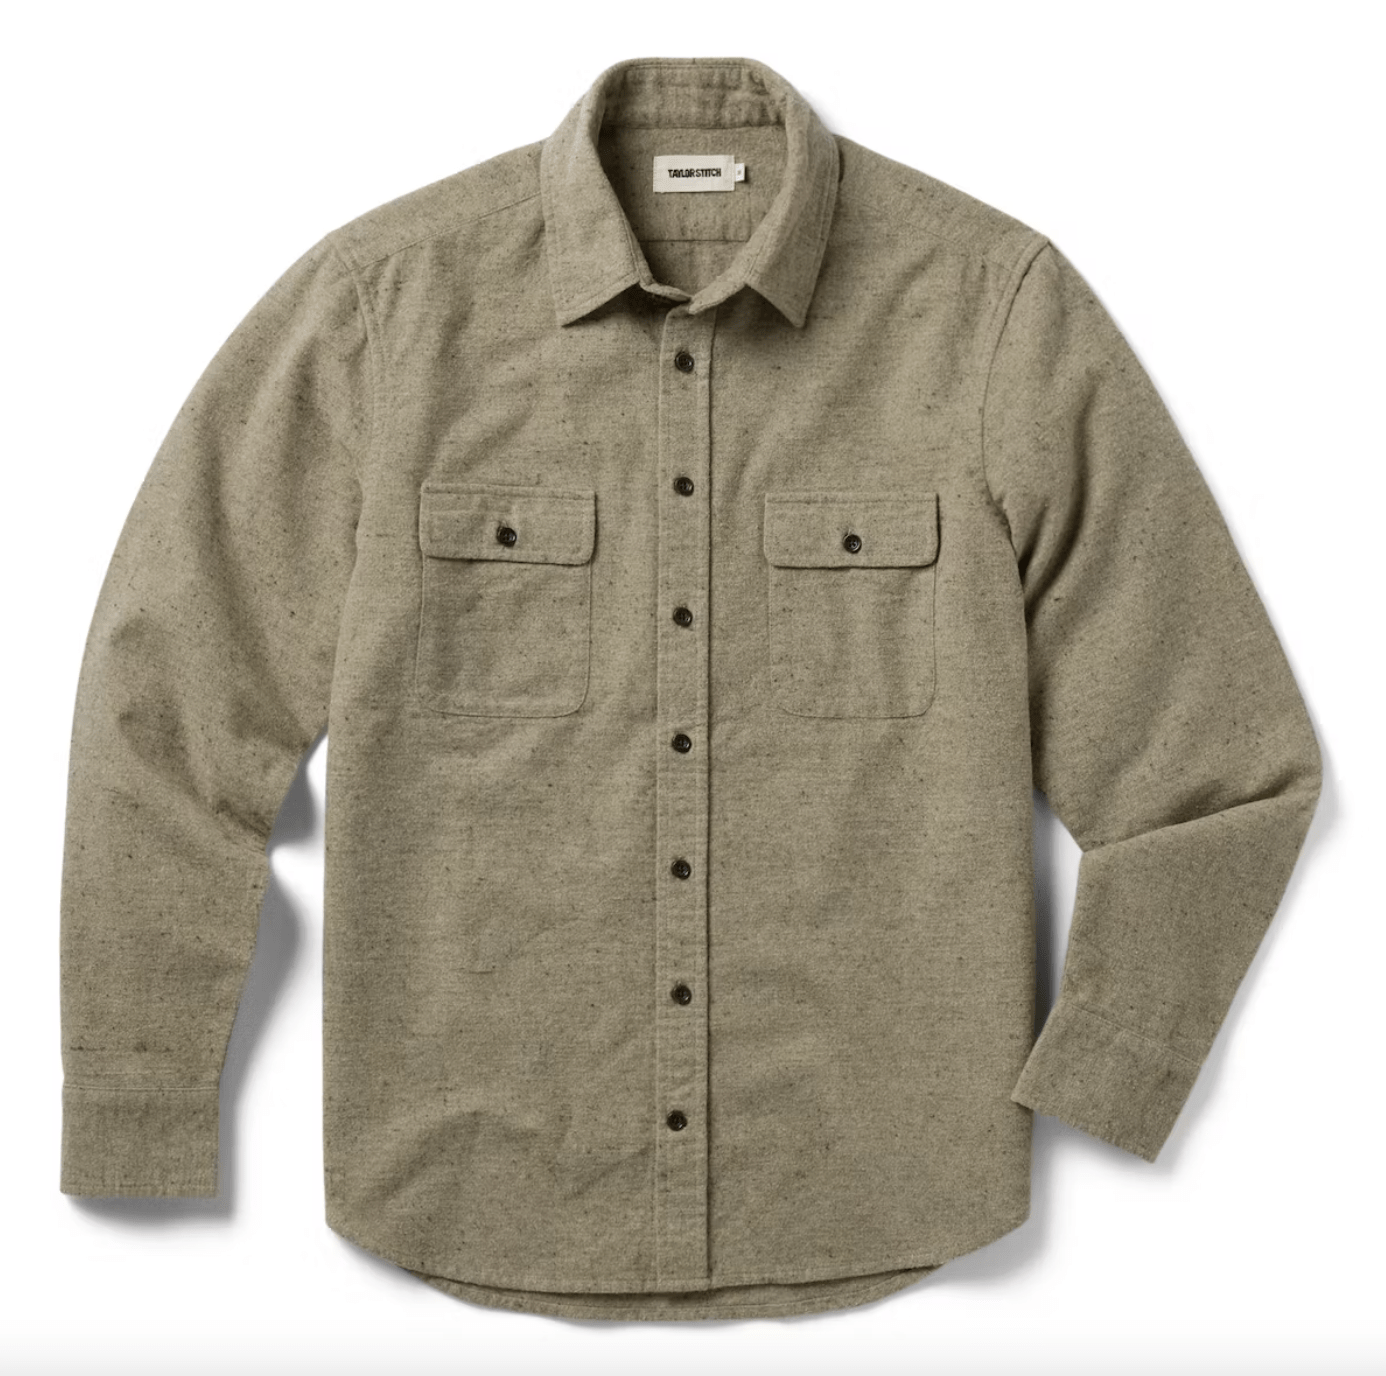 Taylor Stitch Has Men's Shirts and Sweaters For Every Fall Look - BroBible